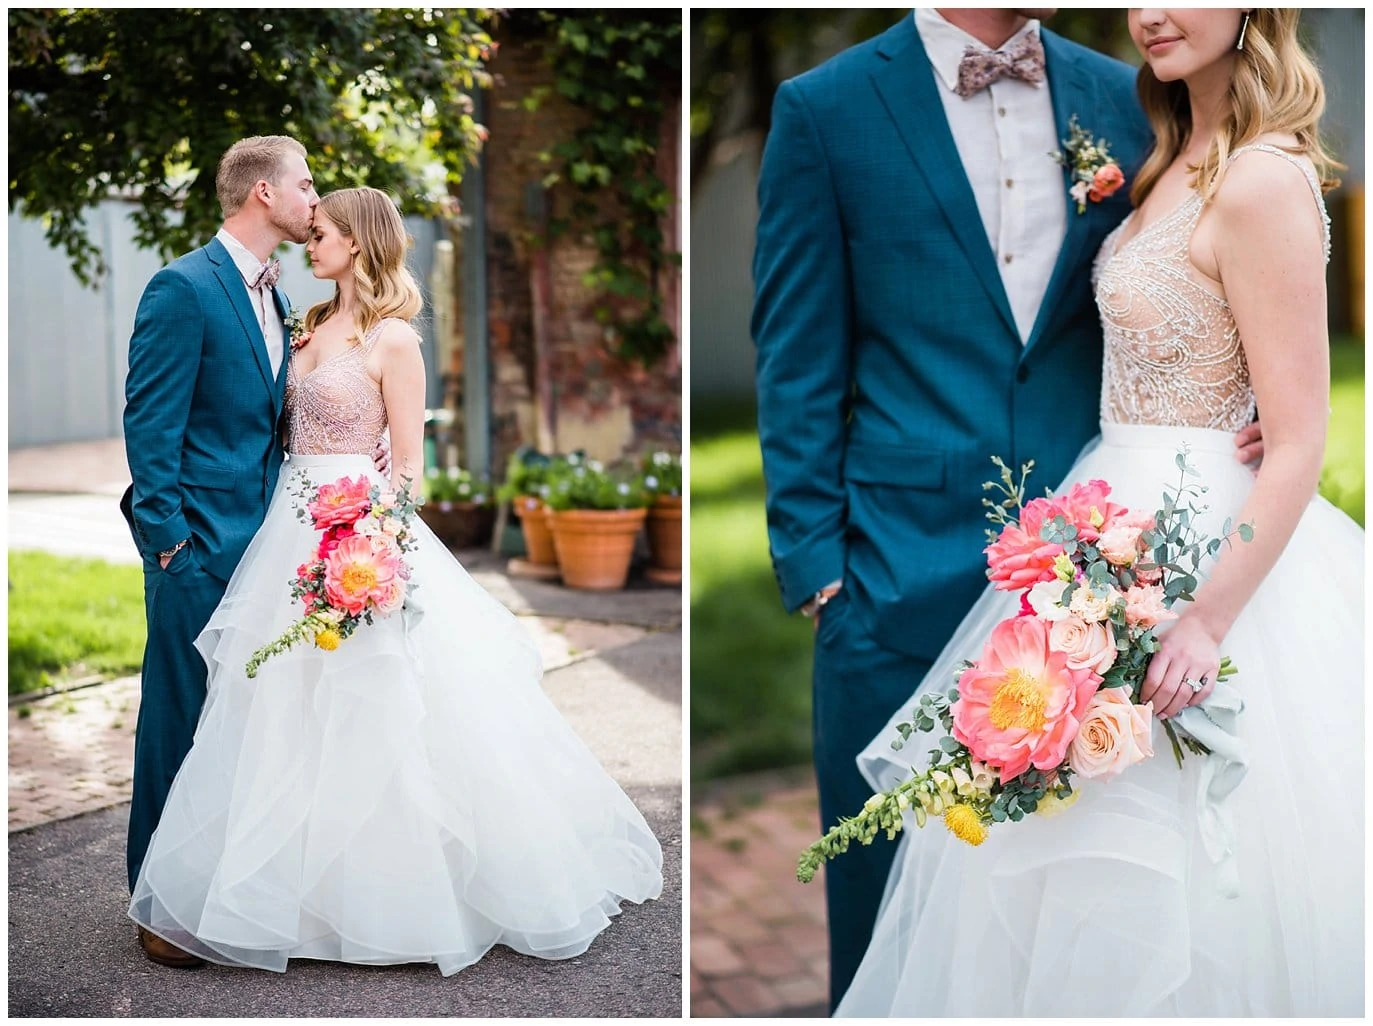 colorful summer wedding photo on outdoor patio at summer blanc wedding by blanc wedding photographer Jennie Crate photographer